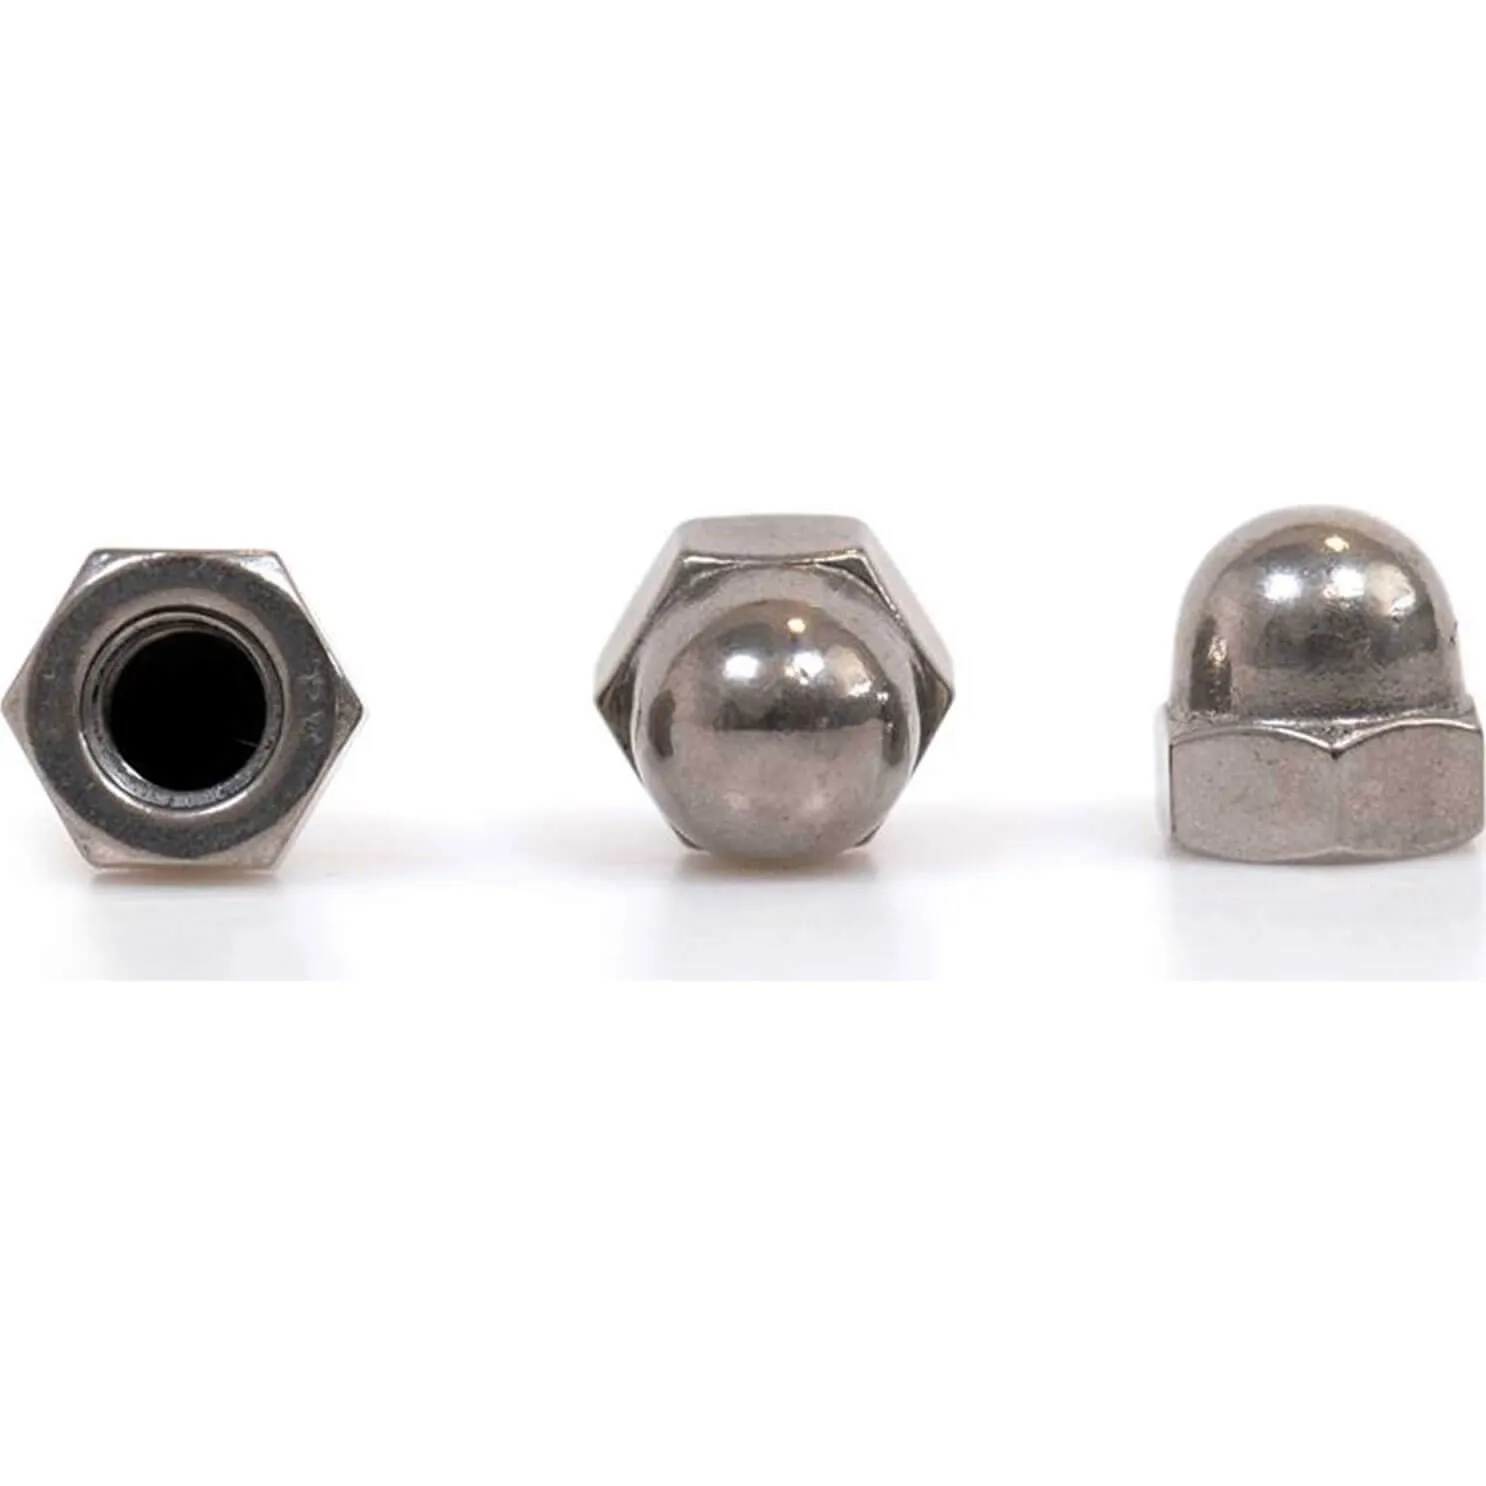 Sirius A4 316 Stainless Steel Hexagon Dome Nuts - M5